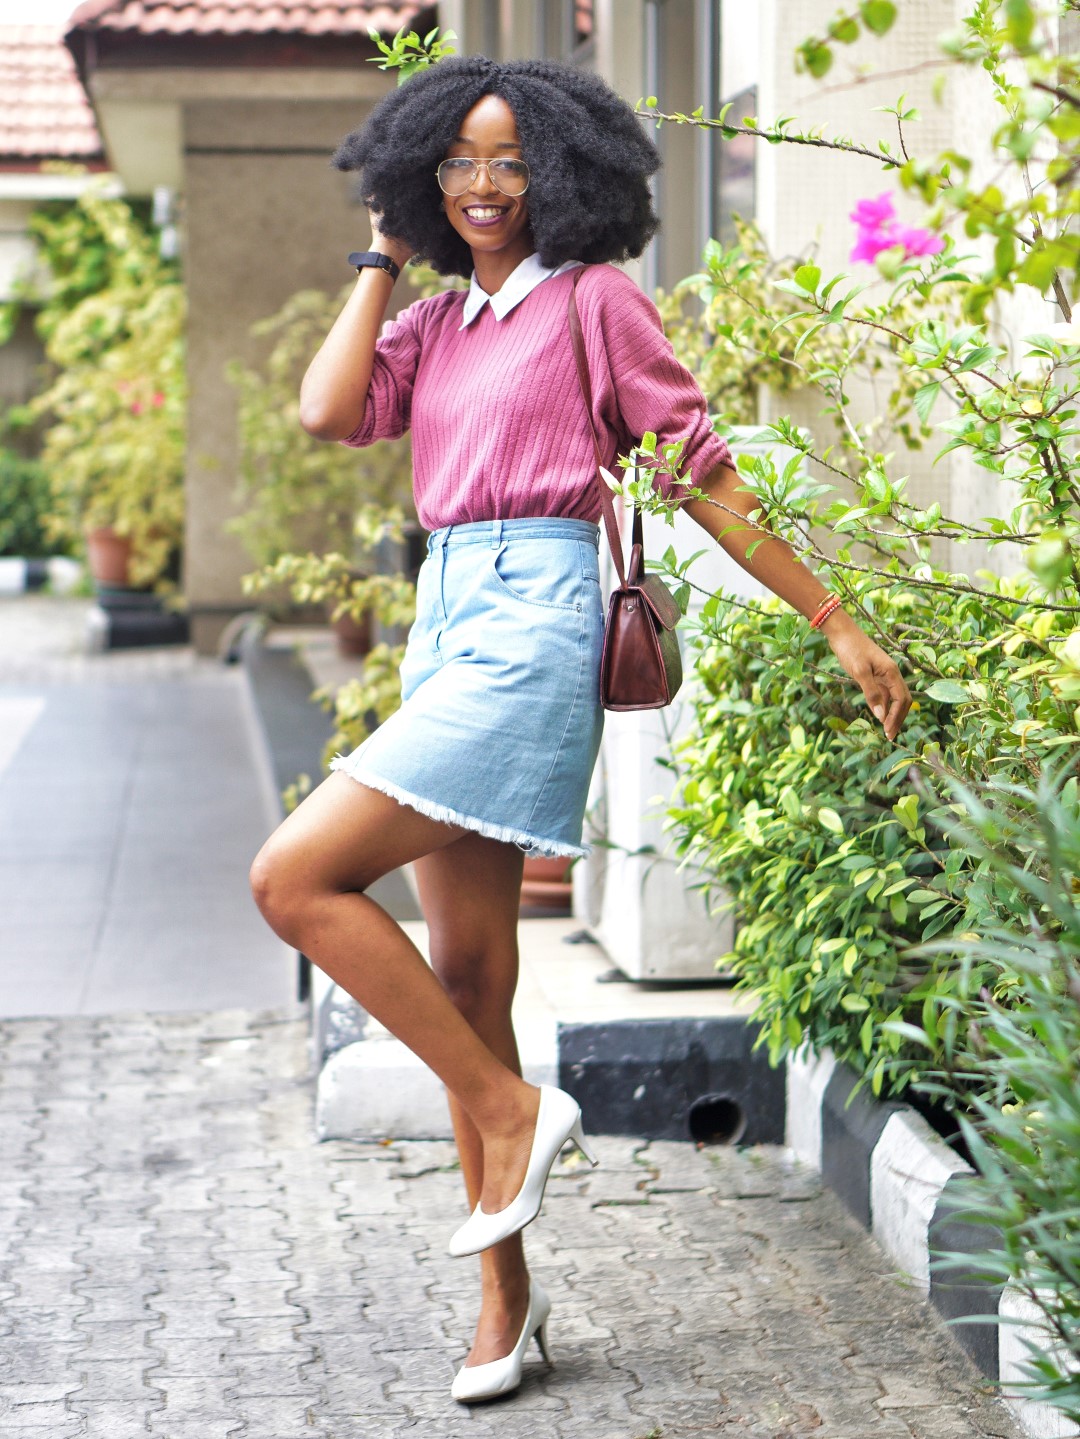 nigerian fashion blogger Cassie daves wearing a denim mini skirt, and white court shoes